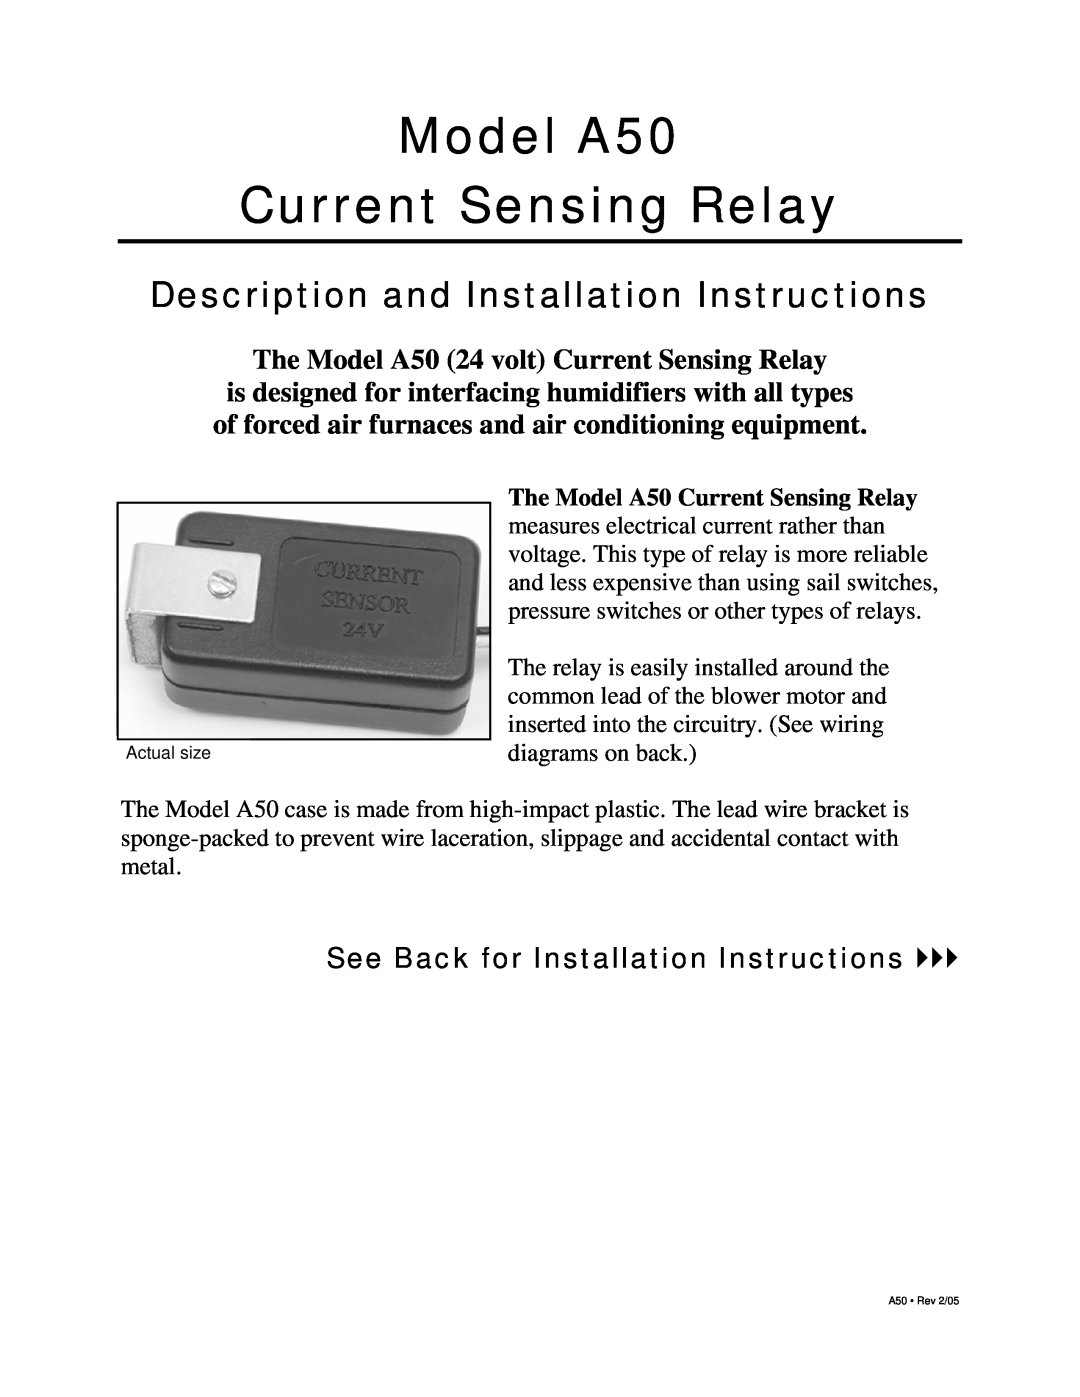 Skuttle Indoor Air Quality Products installation instructions Model A50 Current Sensing Relay 